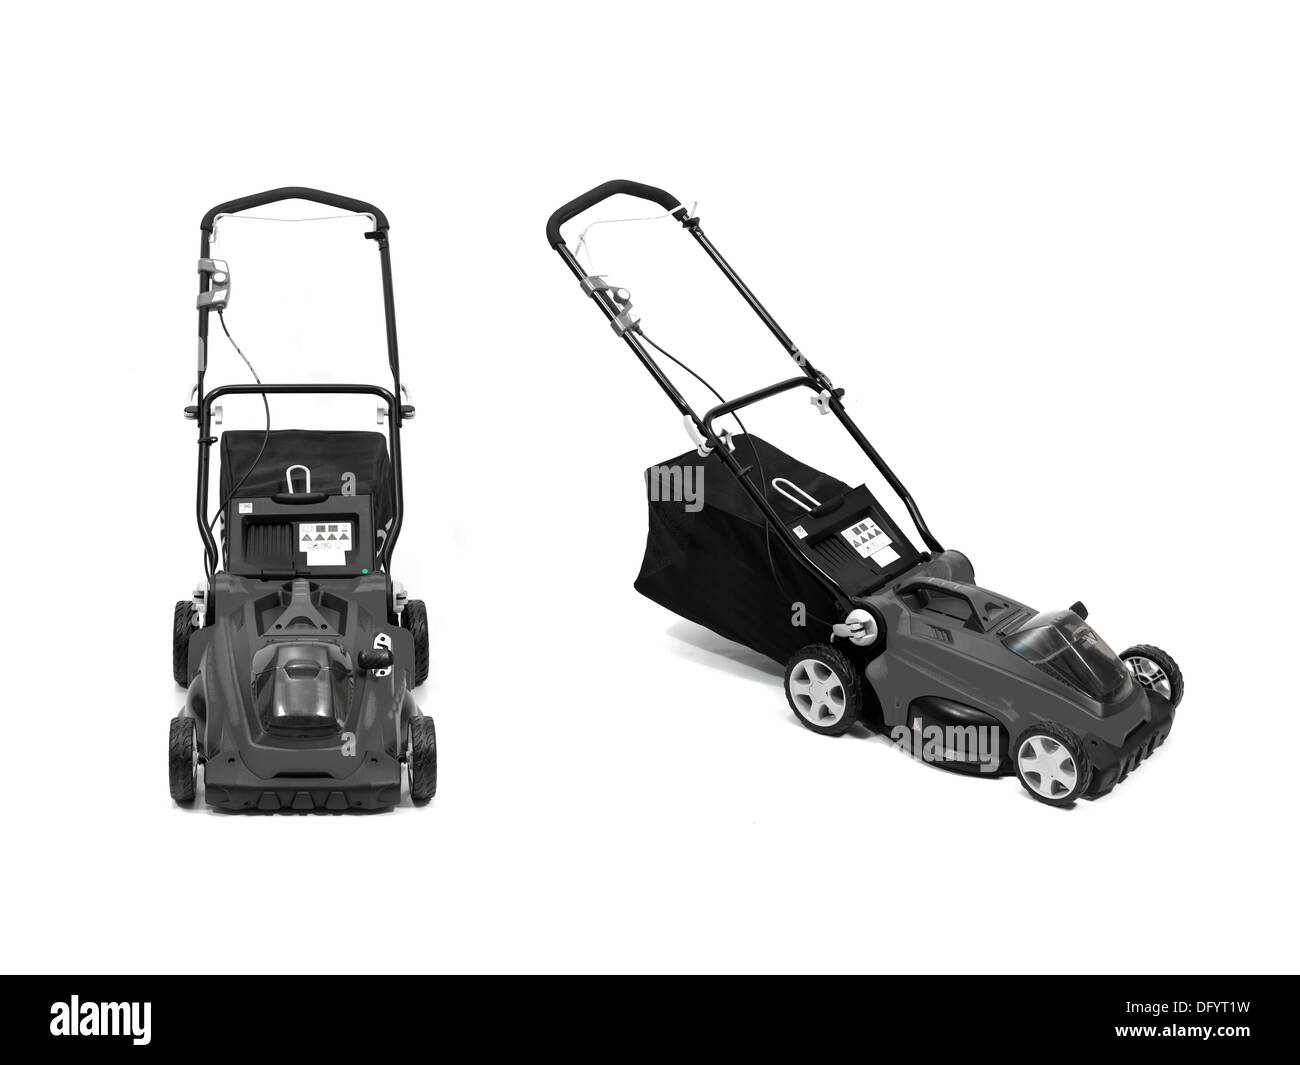 A rechargable lawn mower on a white background Stock Photo